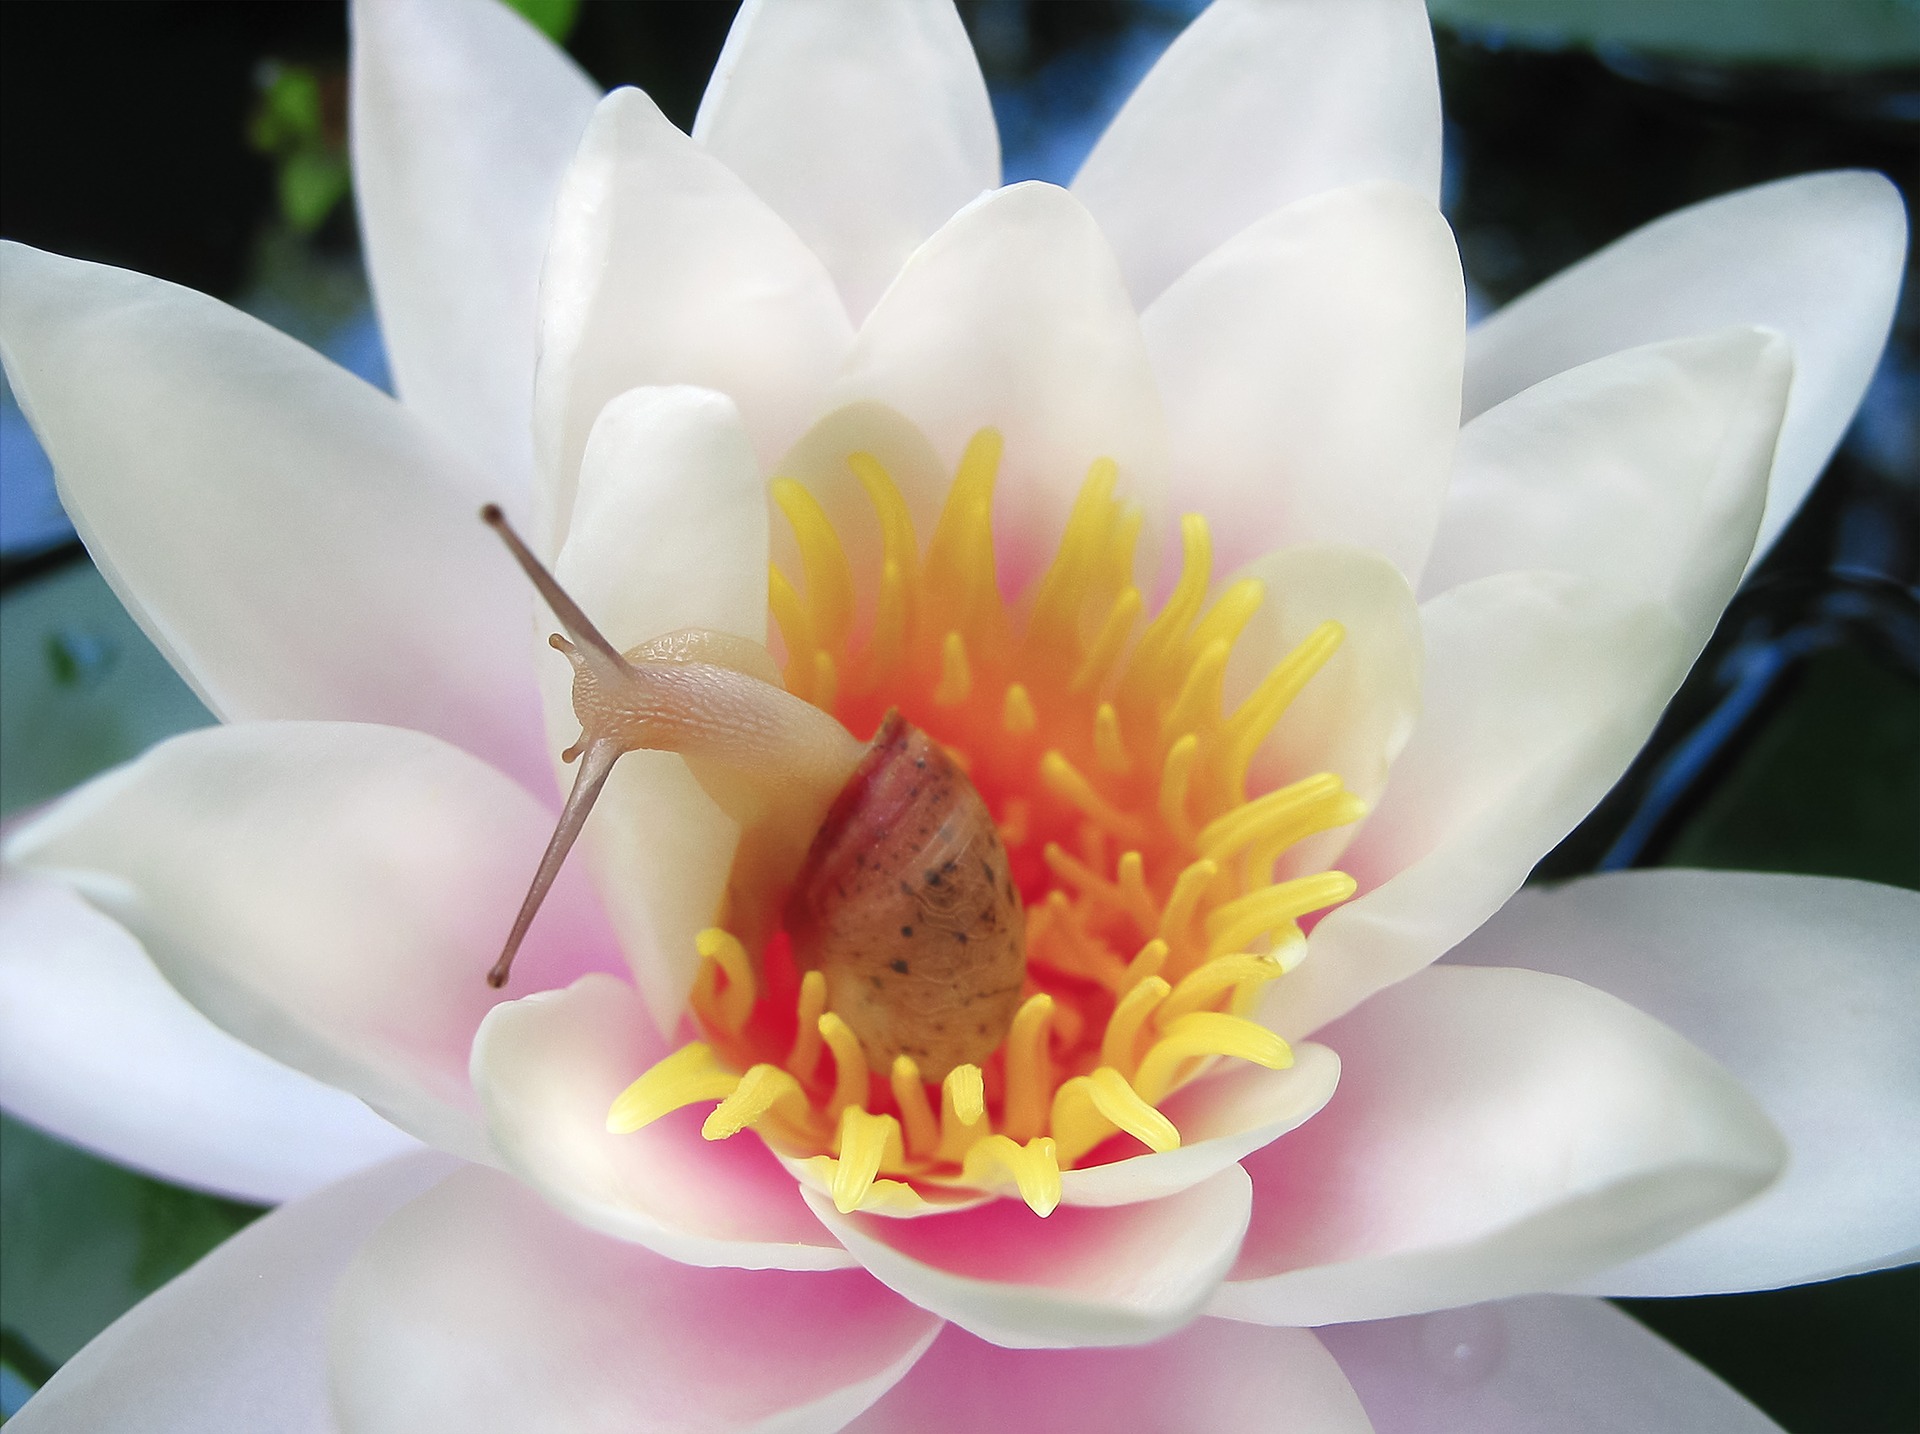 water-lily-g8a3d3d46c_1920